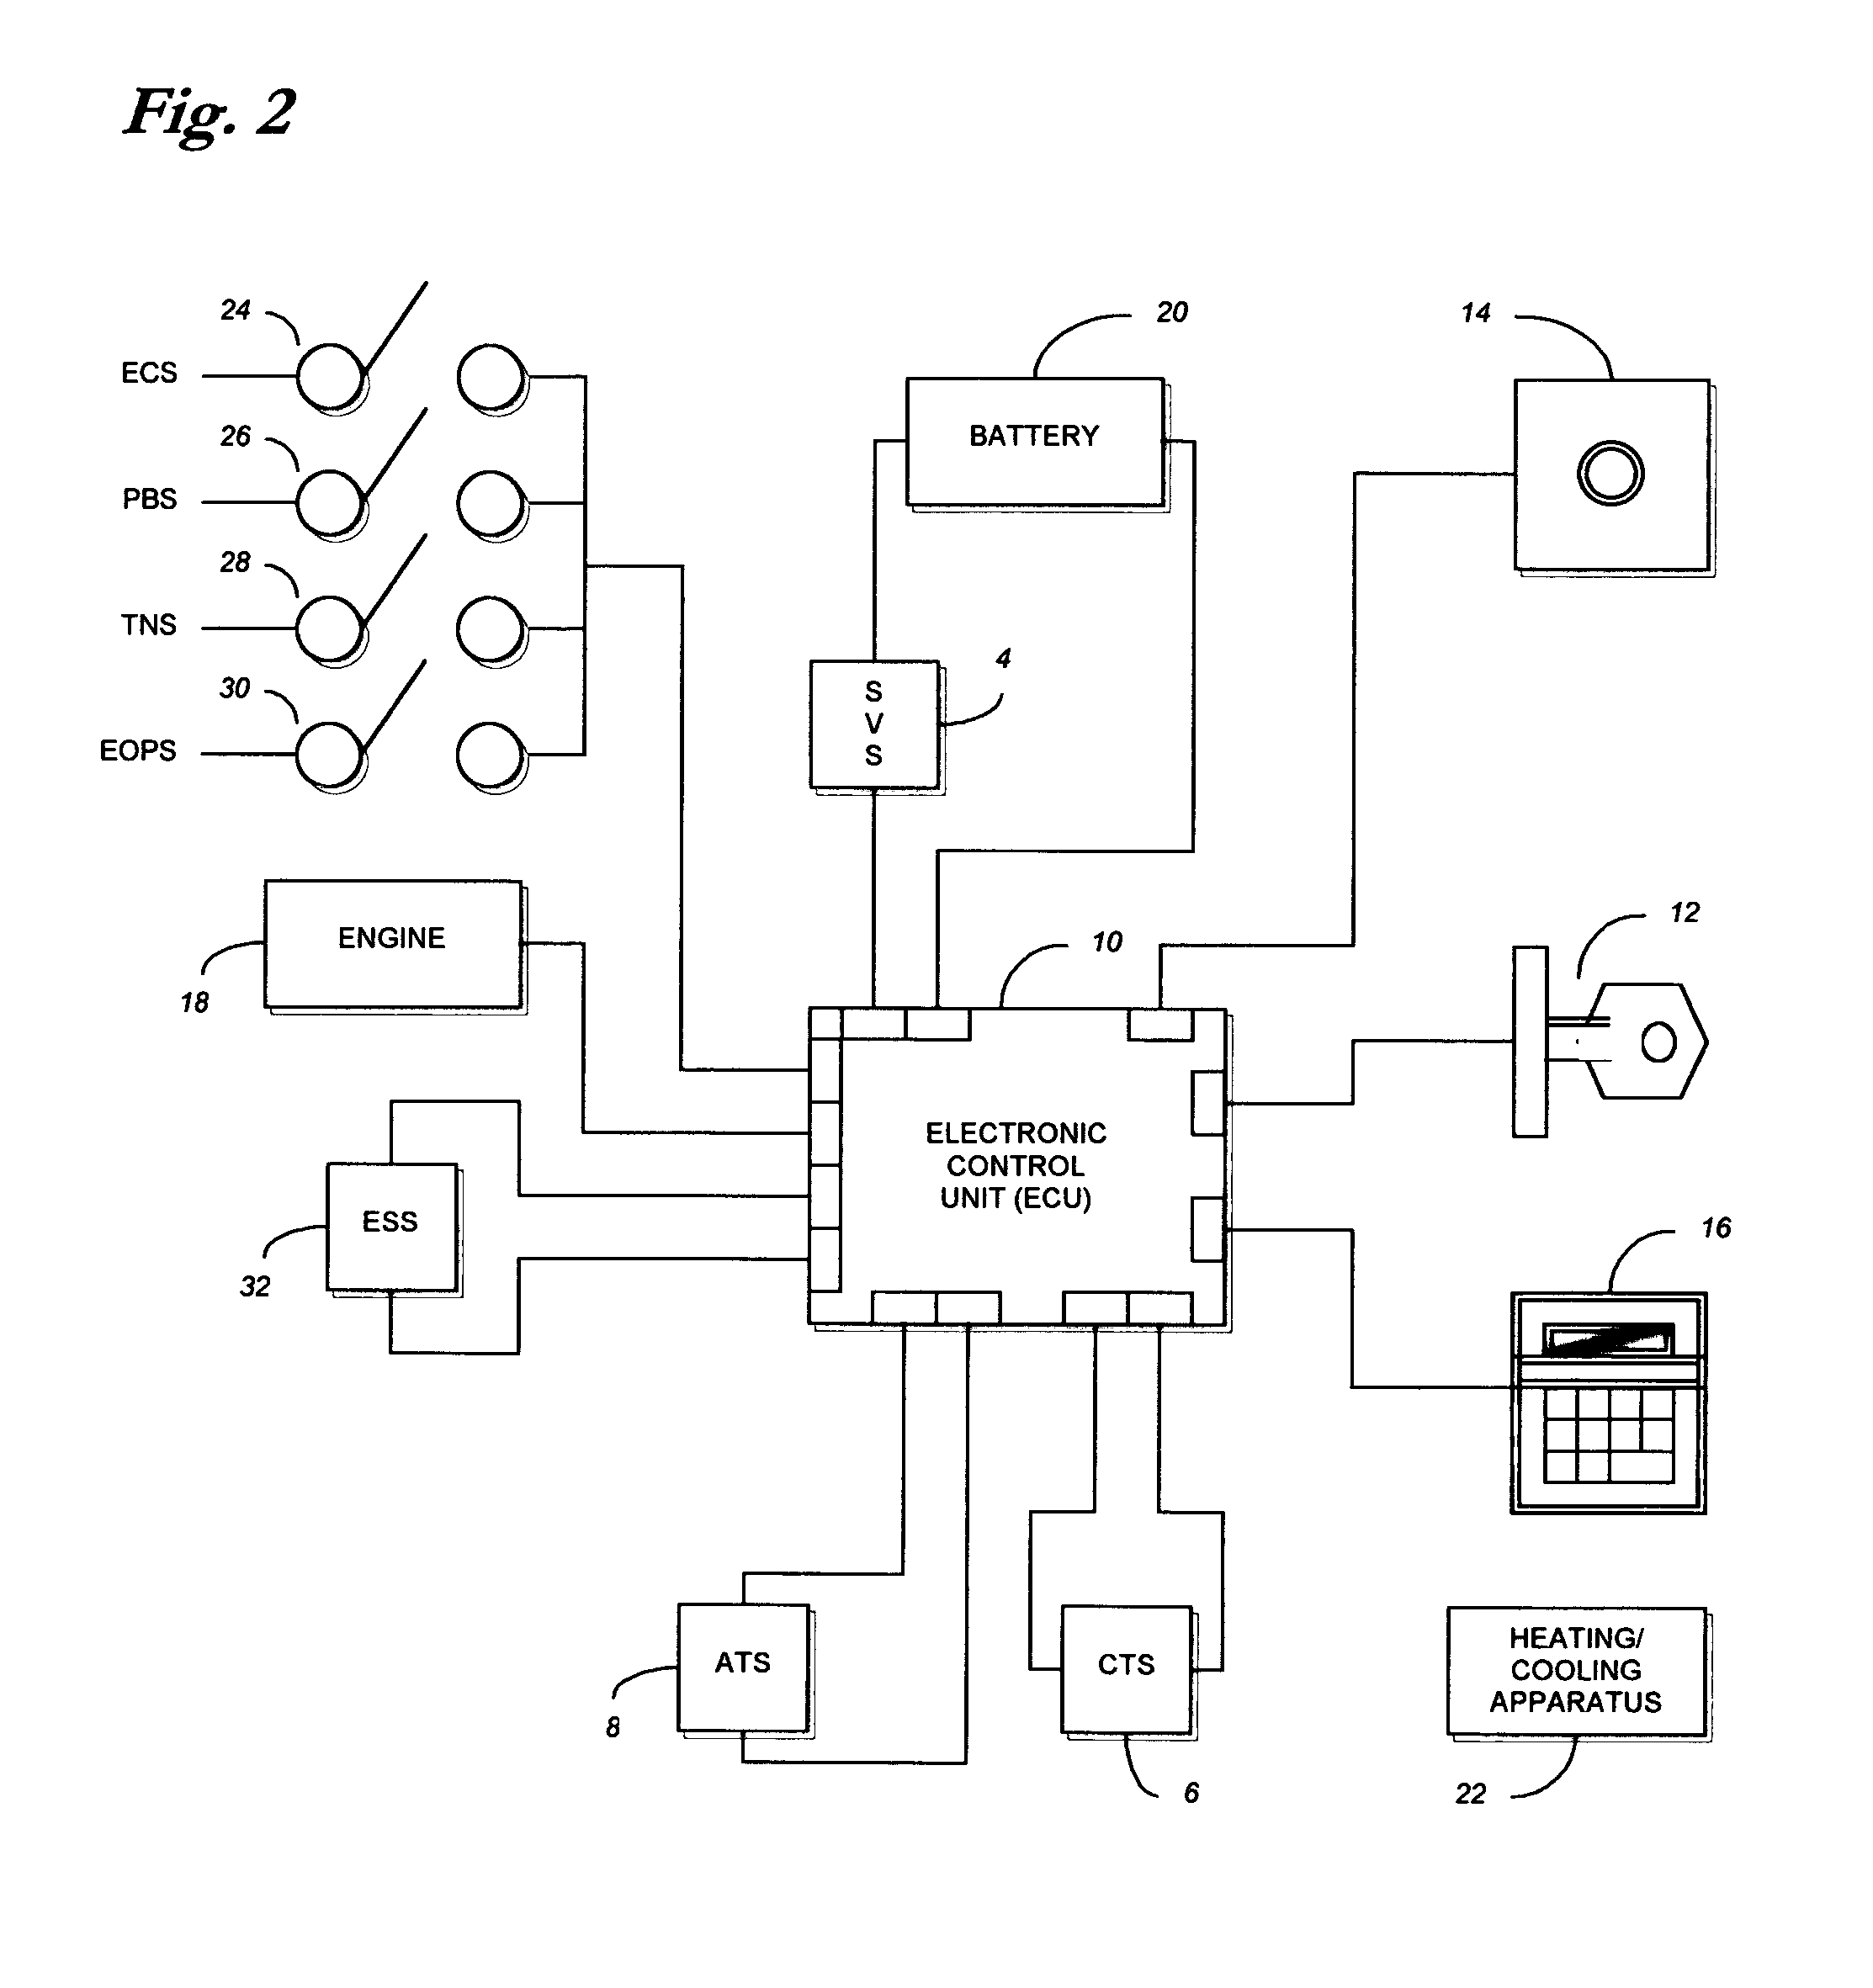 Method and system for controlling an engine to maintain a comfortable cabin temperature within a vehicle